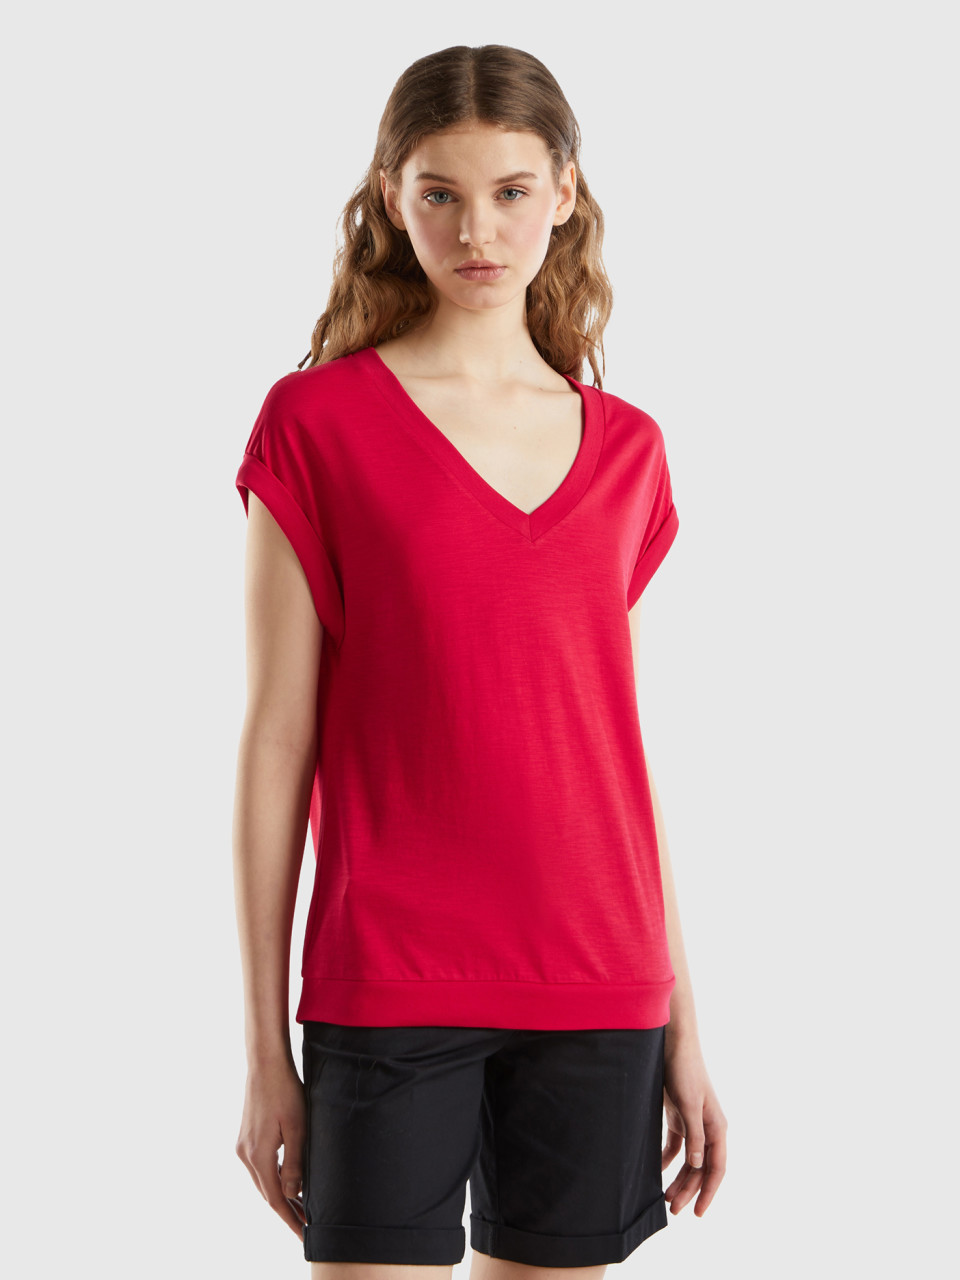 Benetton, T-shirt With V-neck, Red, Women